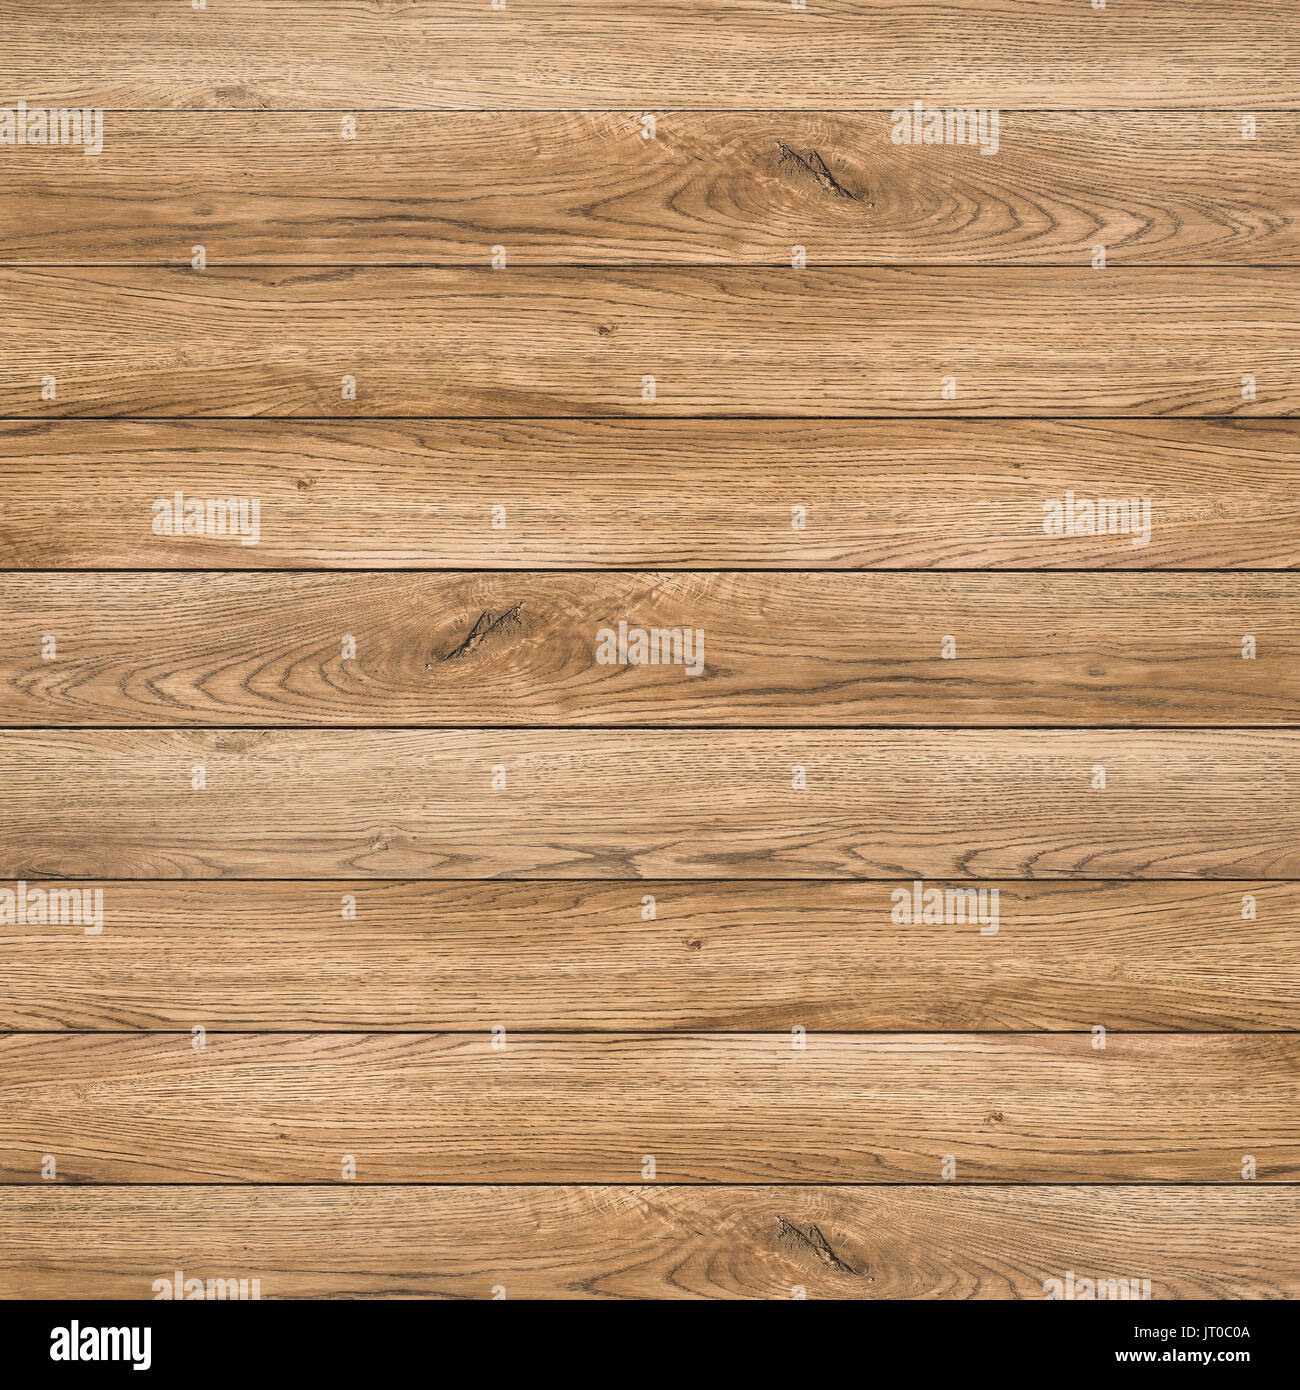 wooden background or timber wood background Stock Photo